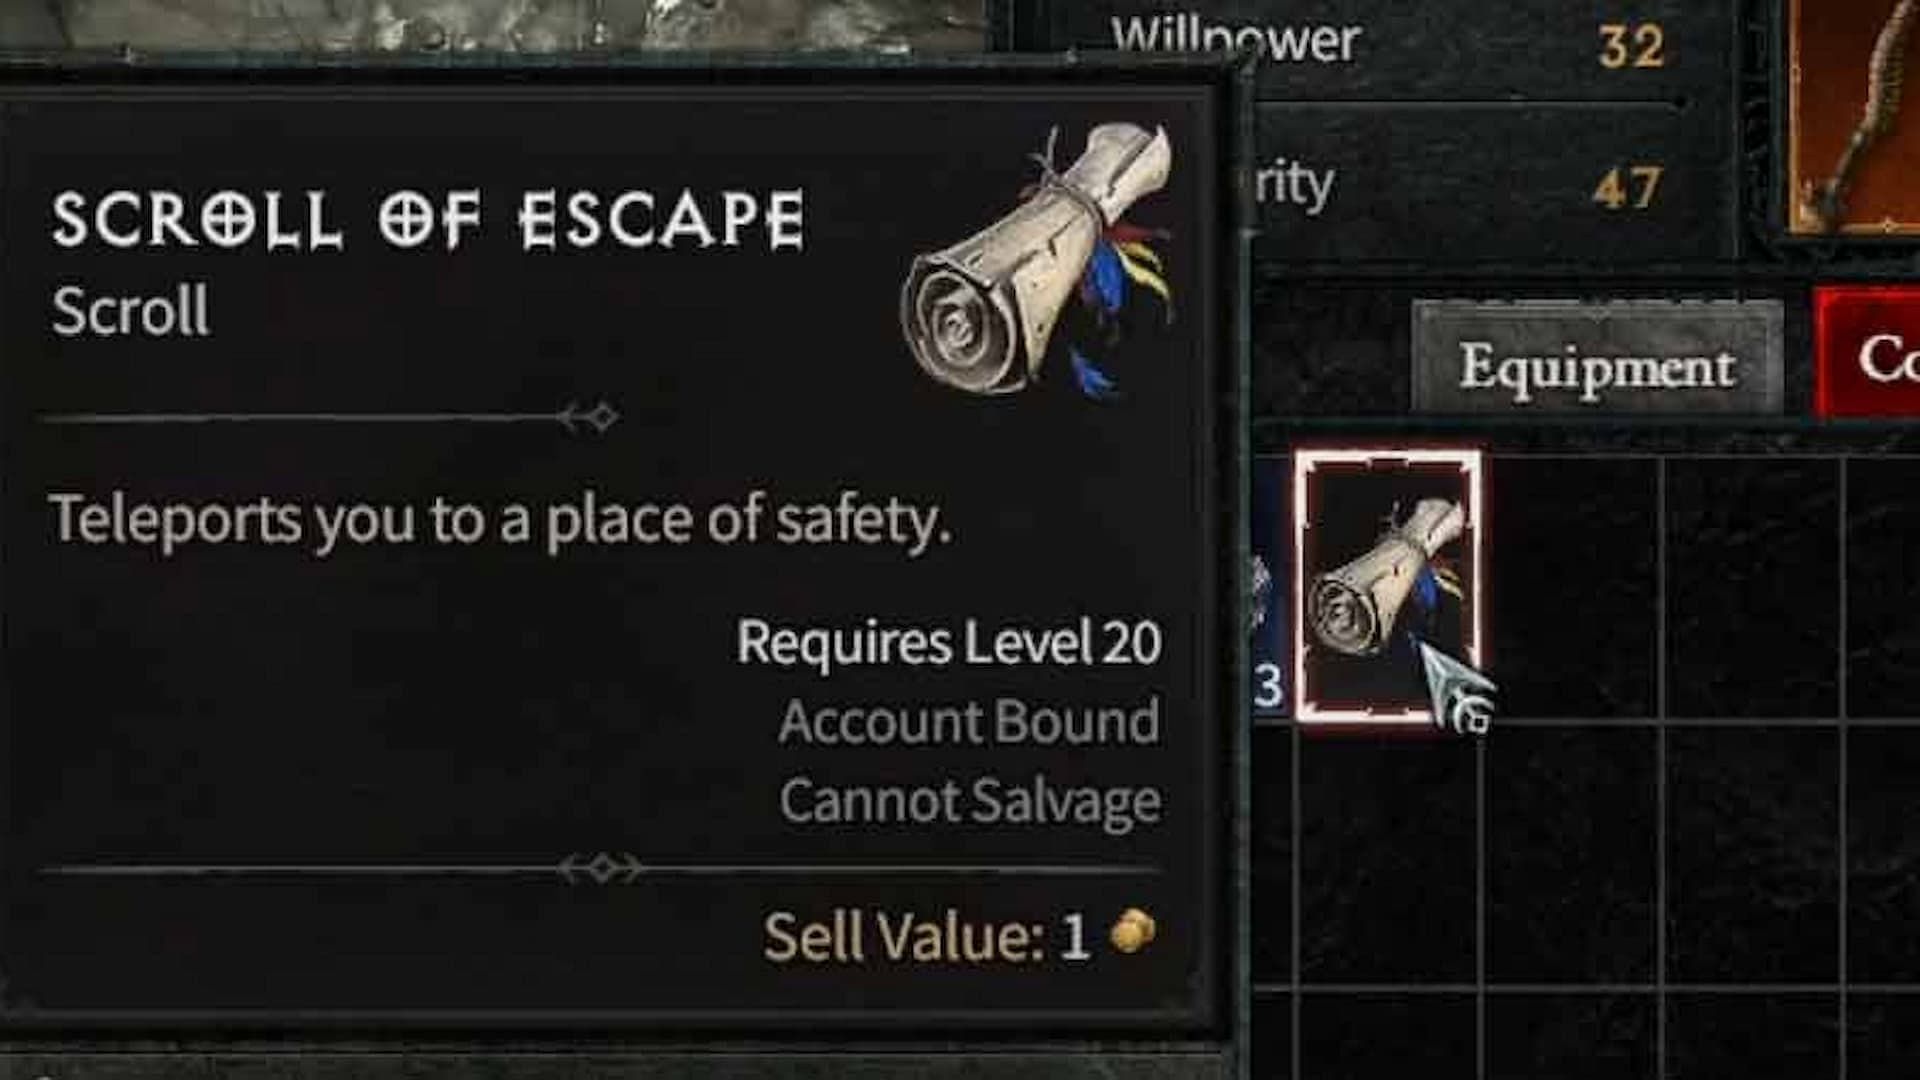 Scrolls of Escape will be automatically consumed if a player disconnects (Image via Blizzard)